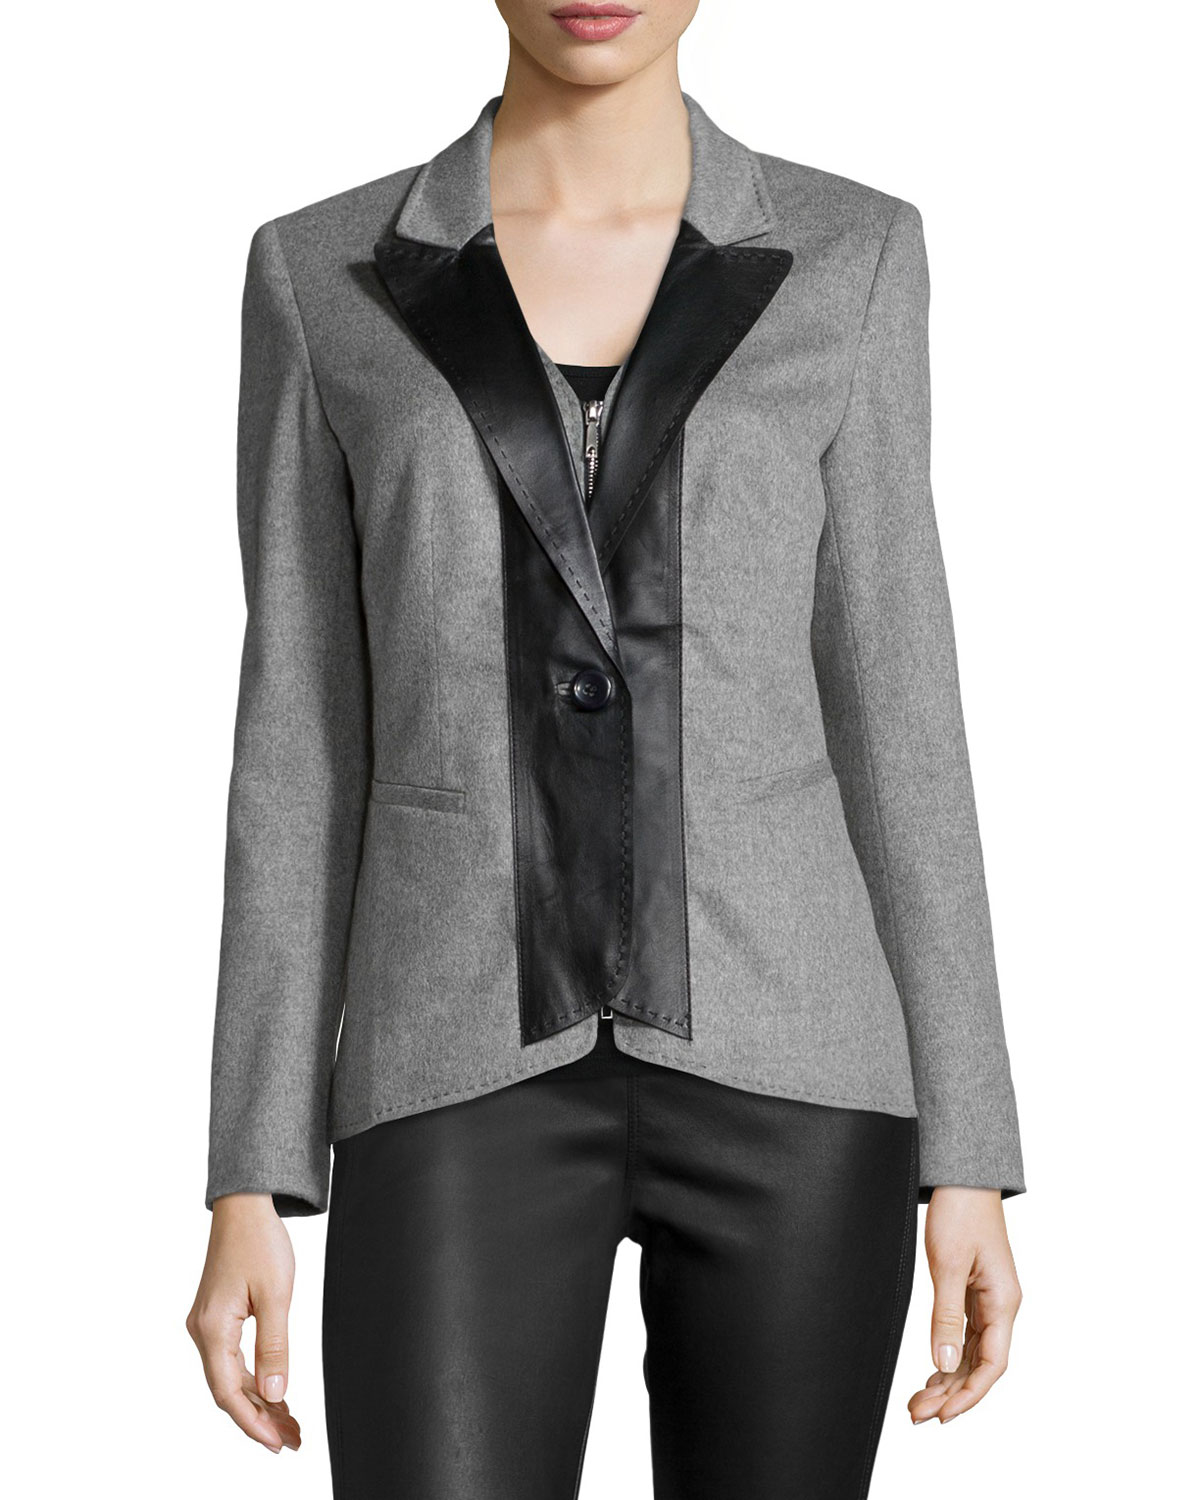 Lyst - Lafayette 148 New York Greer Cashmere Jacket W/leather Trim in Gray